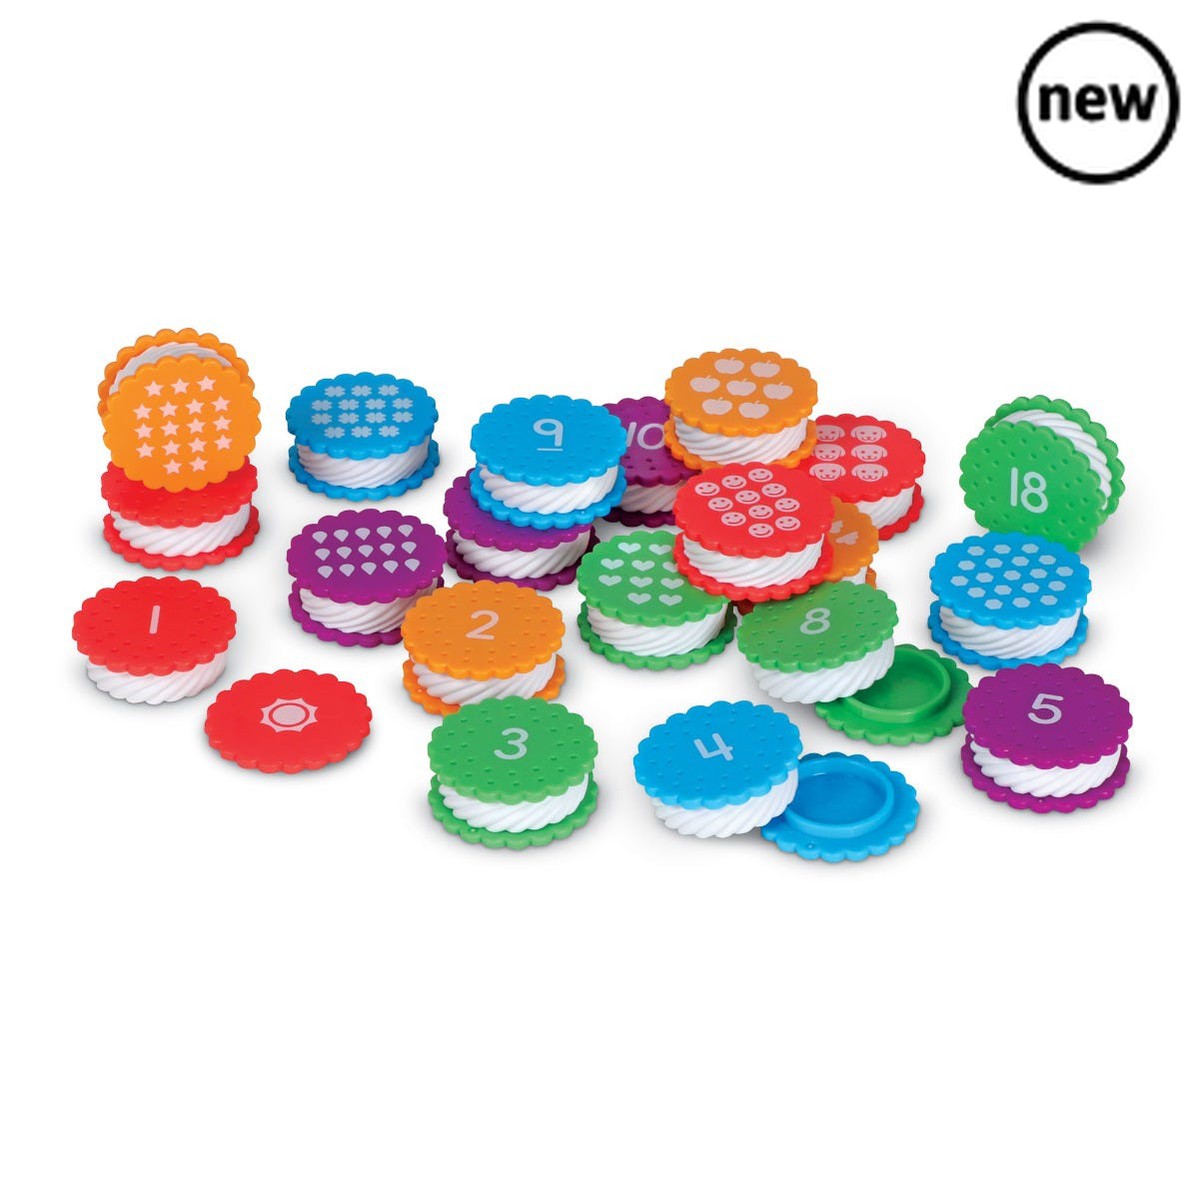 Mini Number Treats, Each colourful cookie toy in this set puts a playful twist on learning numbers and colours. One side of each cookie toy features a number from 1–20, and the other has a picture of the corresponding number of dolphins, beach balls, and more. Twist open each cookie to reveal a fun tactile texture hidden inside! Includes 20 x 2-piece cookies. Mini Number Treats This Mini Number Treats set of 20 mini number treats introduces children to number and counting skills through engaging hands-on pl